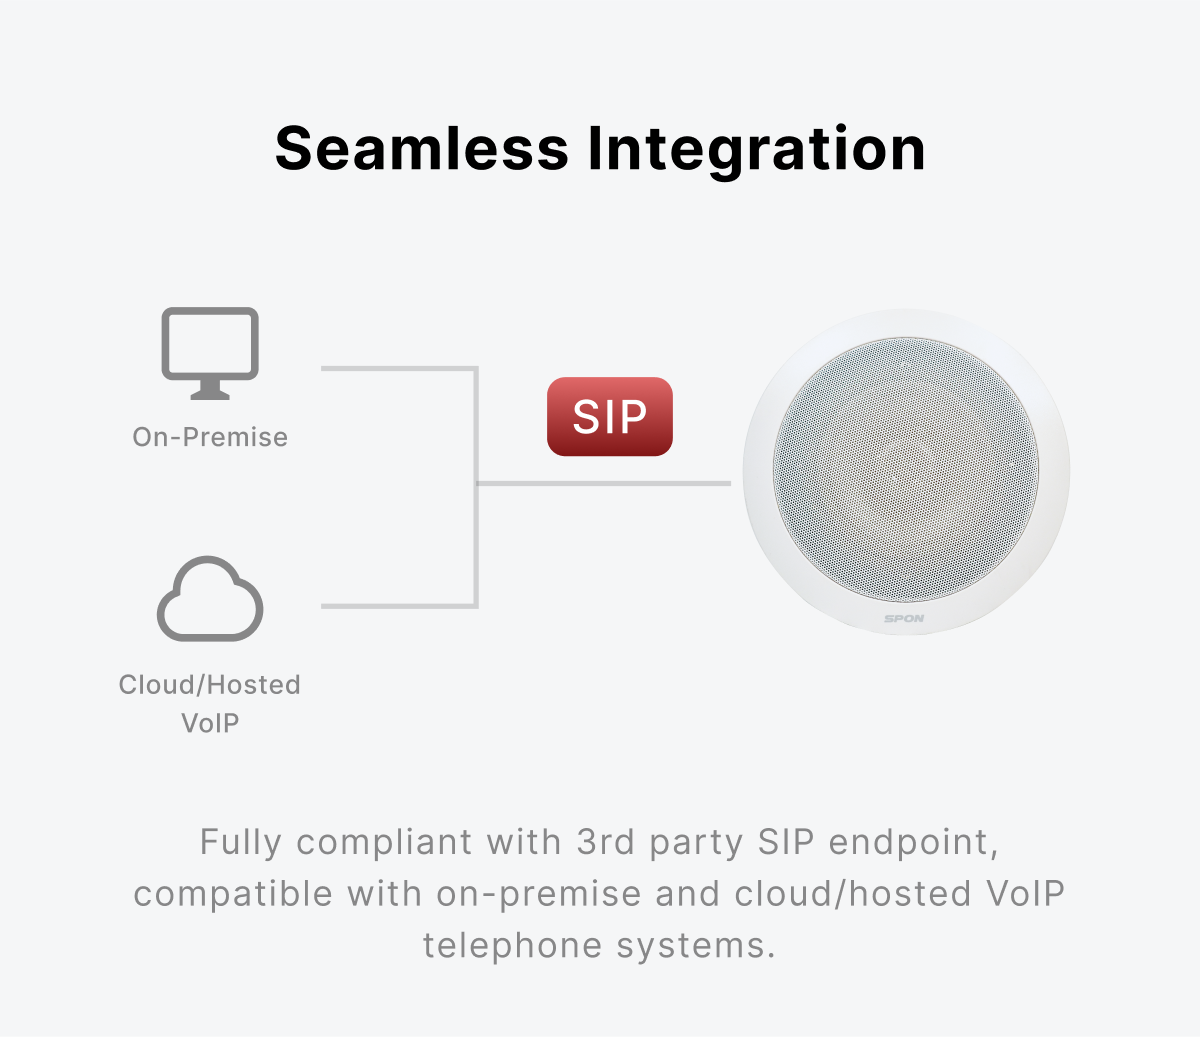 IP POE ceiling speaker, clear sound, powerful connection.  HD Audio Clarity  All-in-One Design  Easy Configuration  Remote Monitoring  Dynamic Volume Control  Instant Emergency Alerts. fully compliant with 3rd party sip endpoint, compatible with on-premise and cloud/hosted voip telephone systems